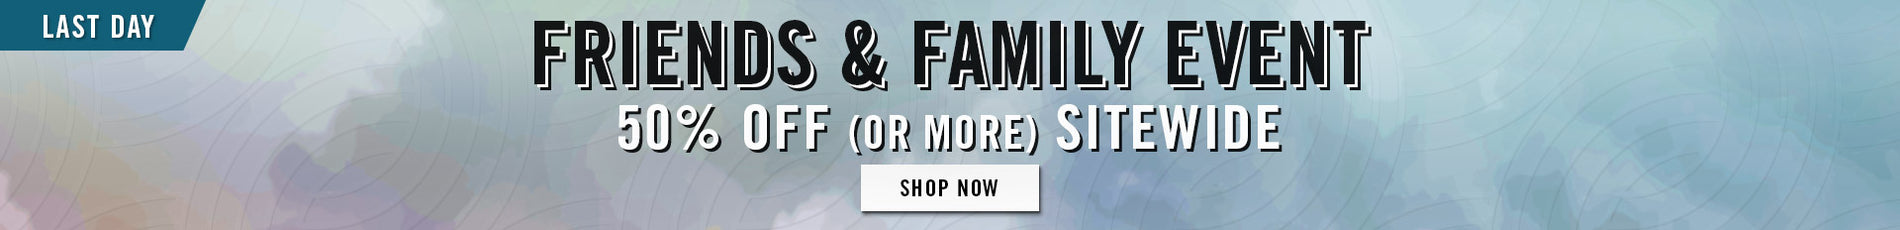 friends and family - 50% off sitewide - SHOP NOW